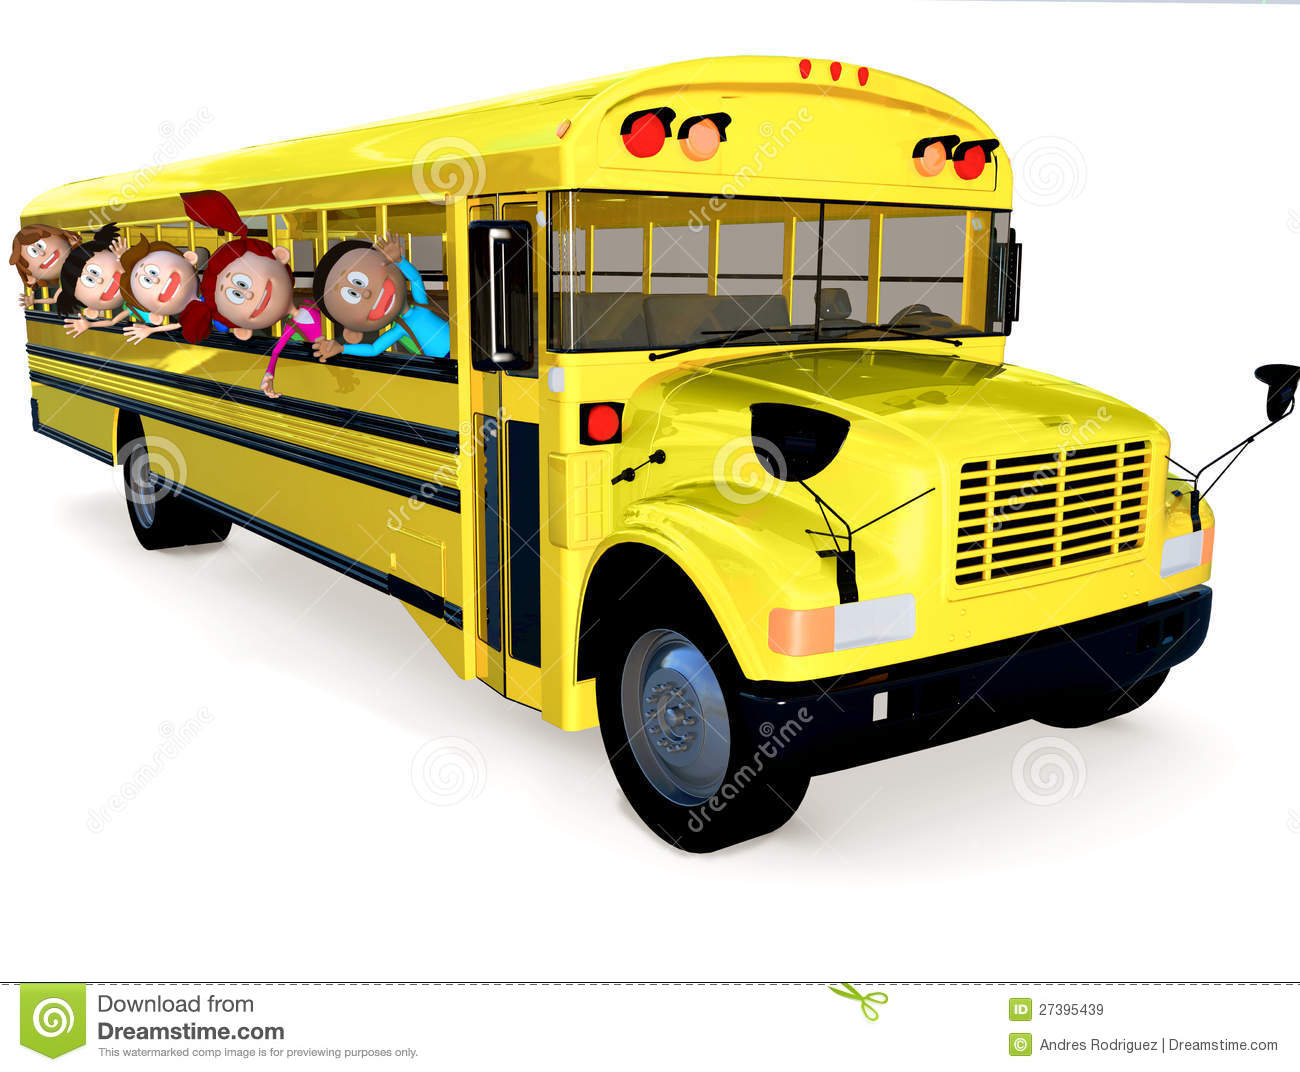 3d Kids In A School Bus Royalty Free Stock Images   Image  27395439